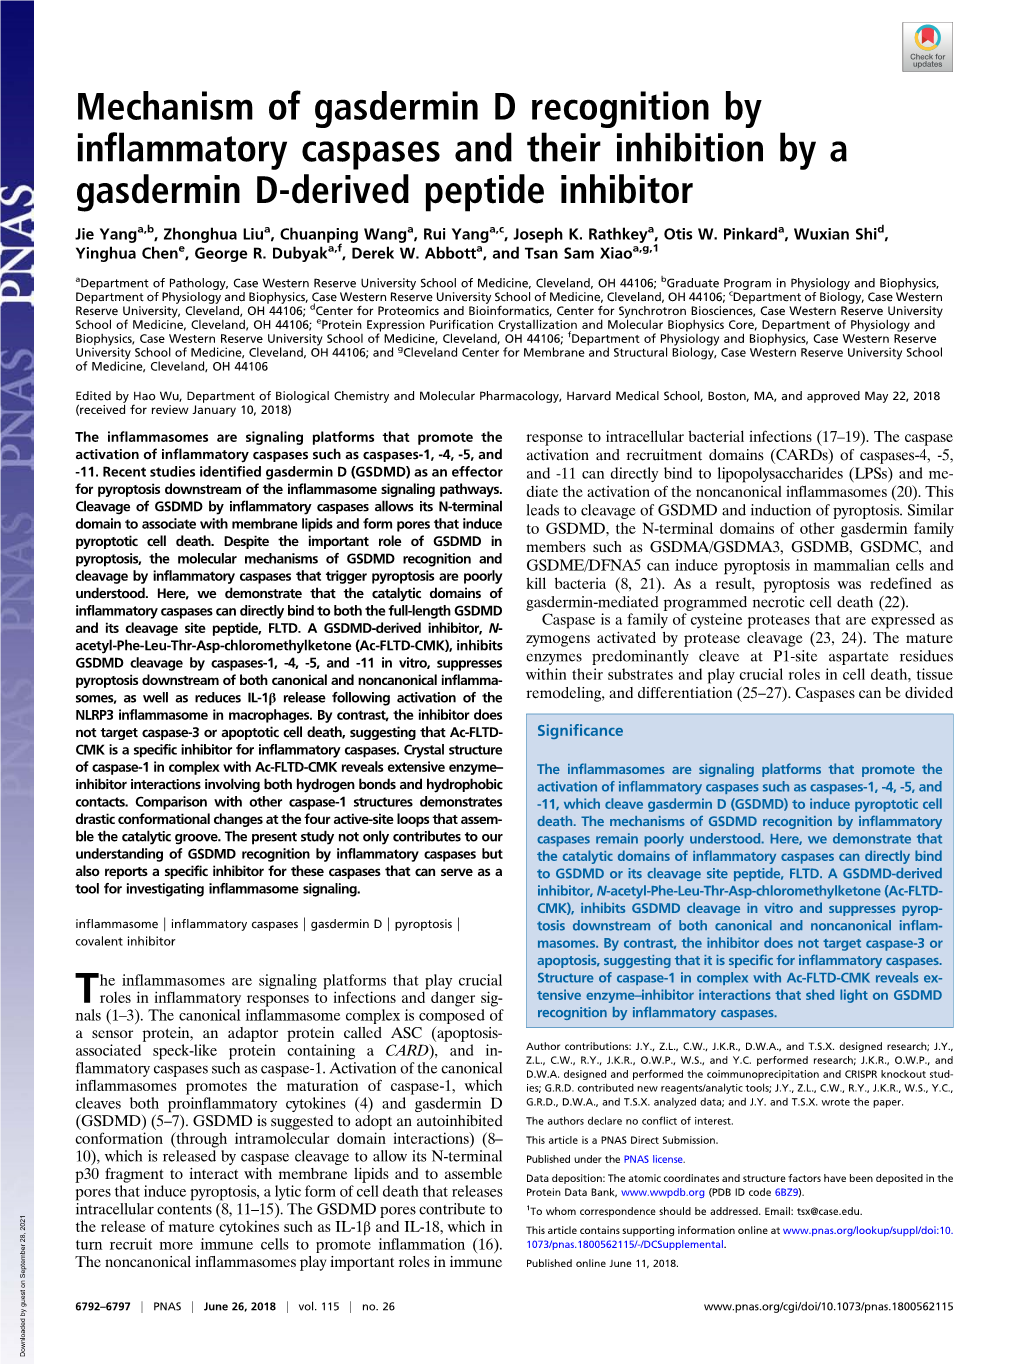 Mechanism of Gasdermin D Recognition by Inflammatory Caspases and Their Inhibition by a Gasdermin D-Derived Peptide Inhibitor